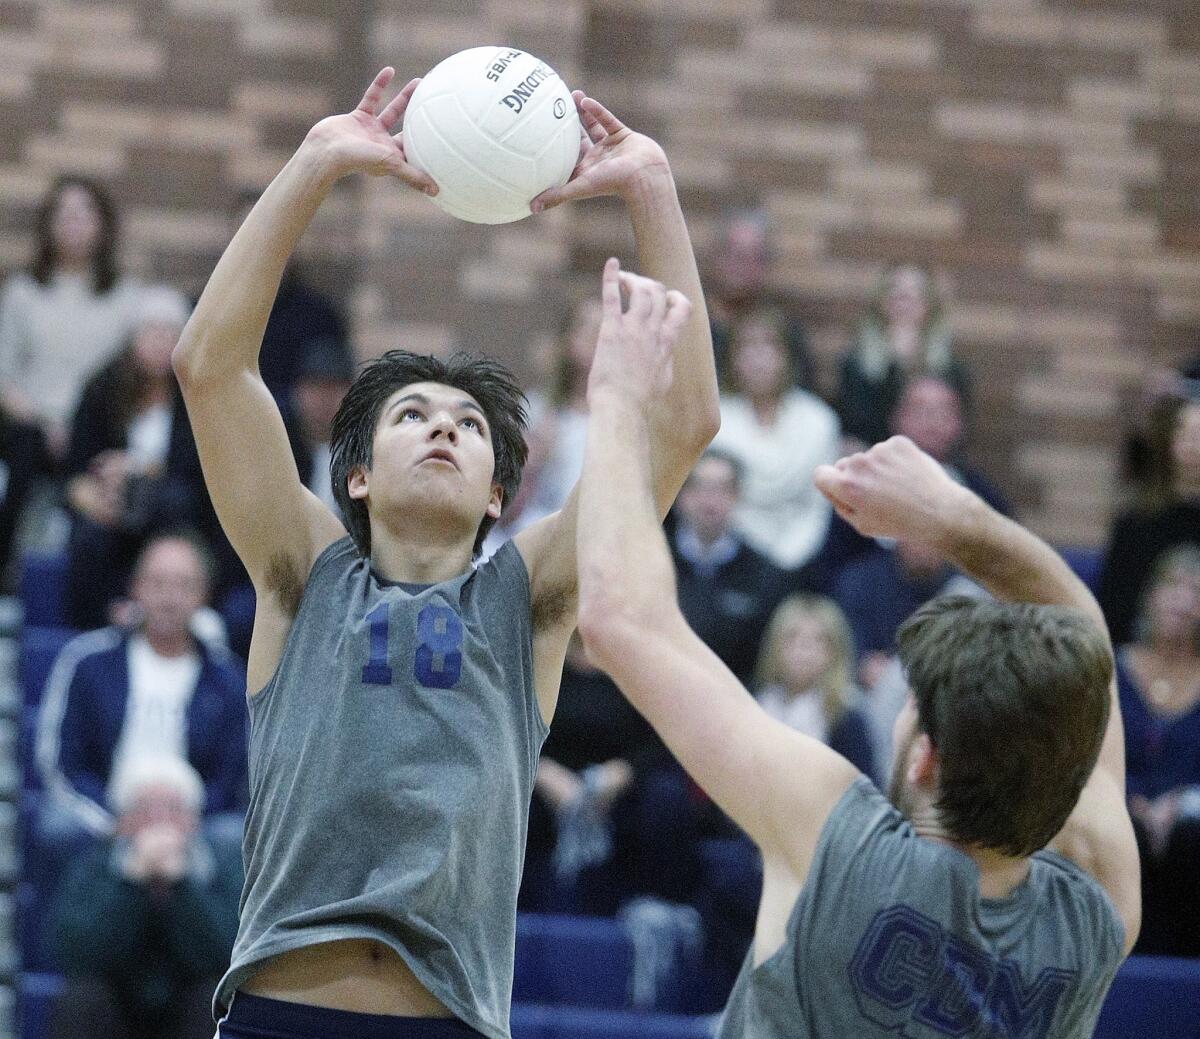 Corona del Mar High's Bryce Dvorak sets the ball for a kill against Loyola in a nonleague match at Loyola on Wednesday.